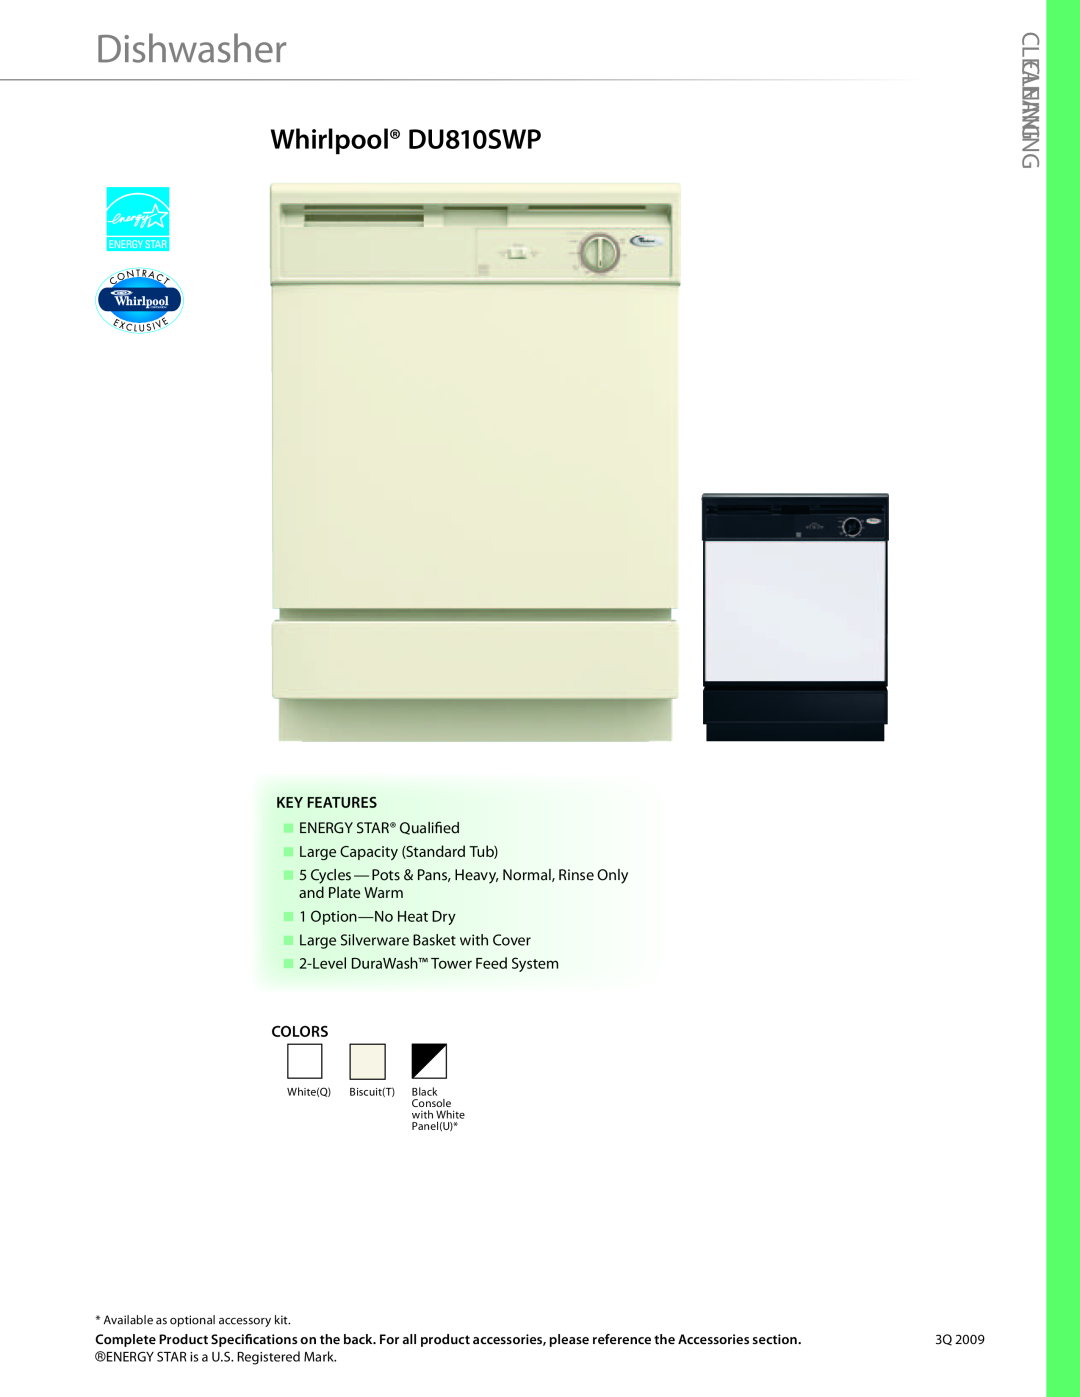 Whirlpool manual Whirlpool DU810SWP, Dishwasher, CleaNiNg, Key Features, Option-NoHeat Dry, Colors 